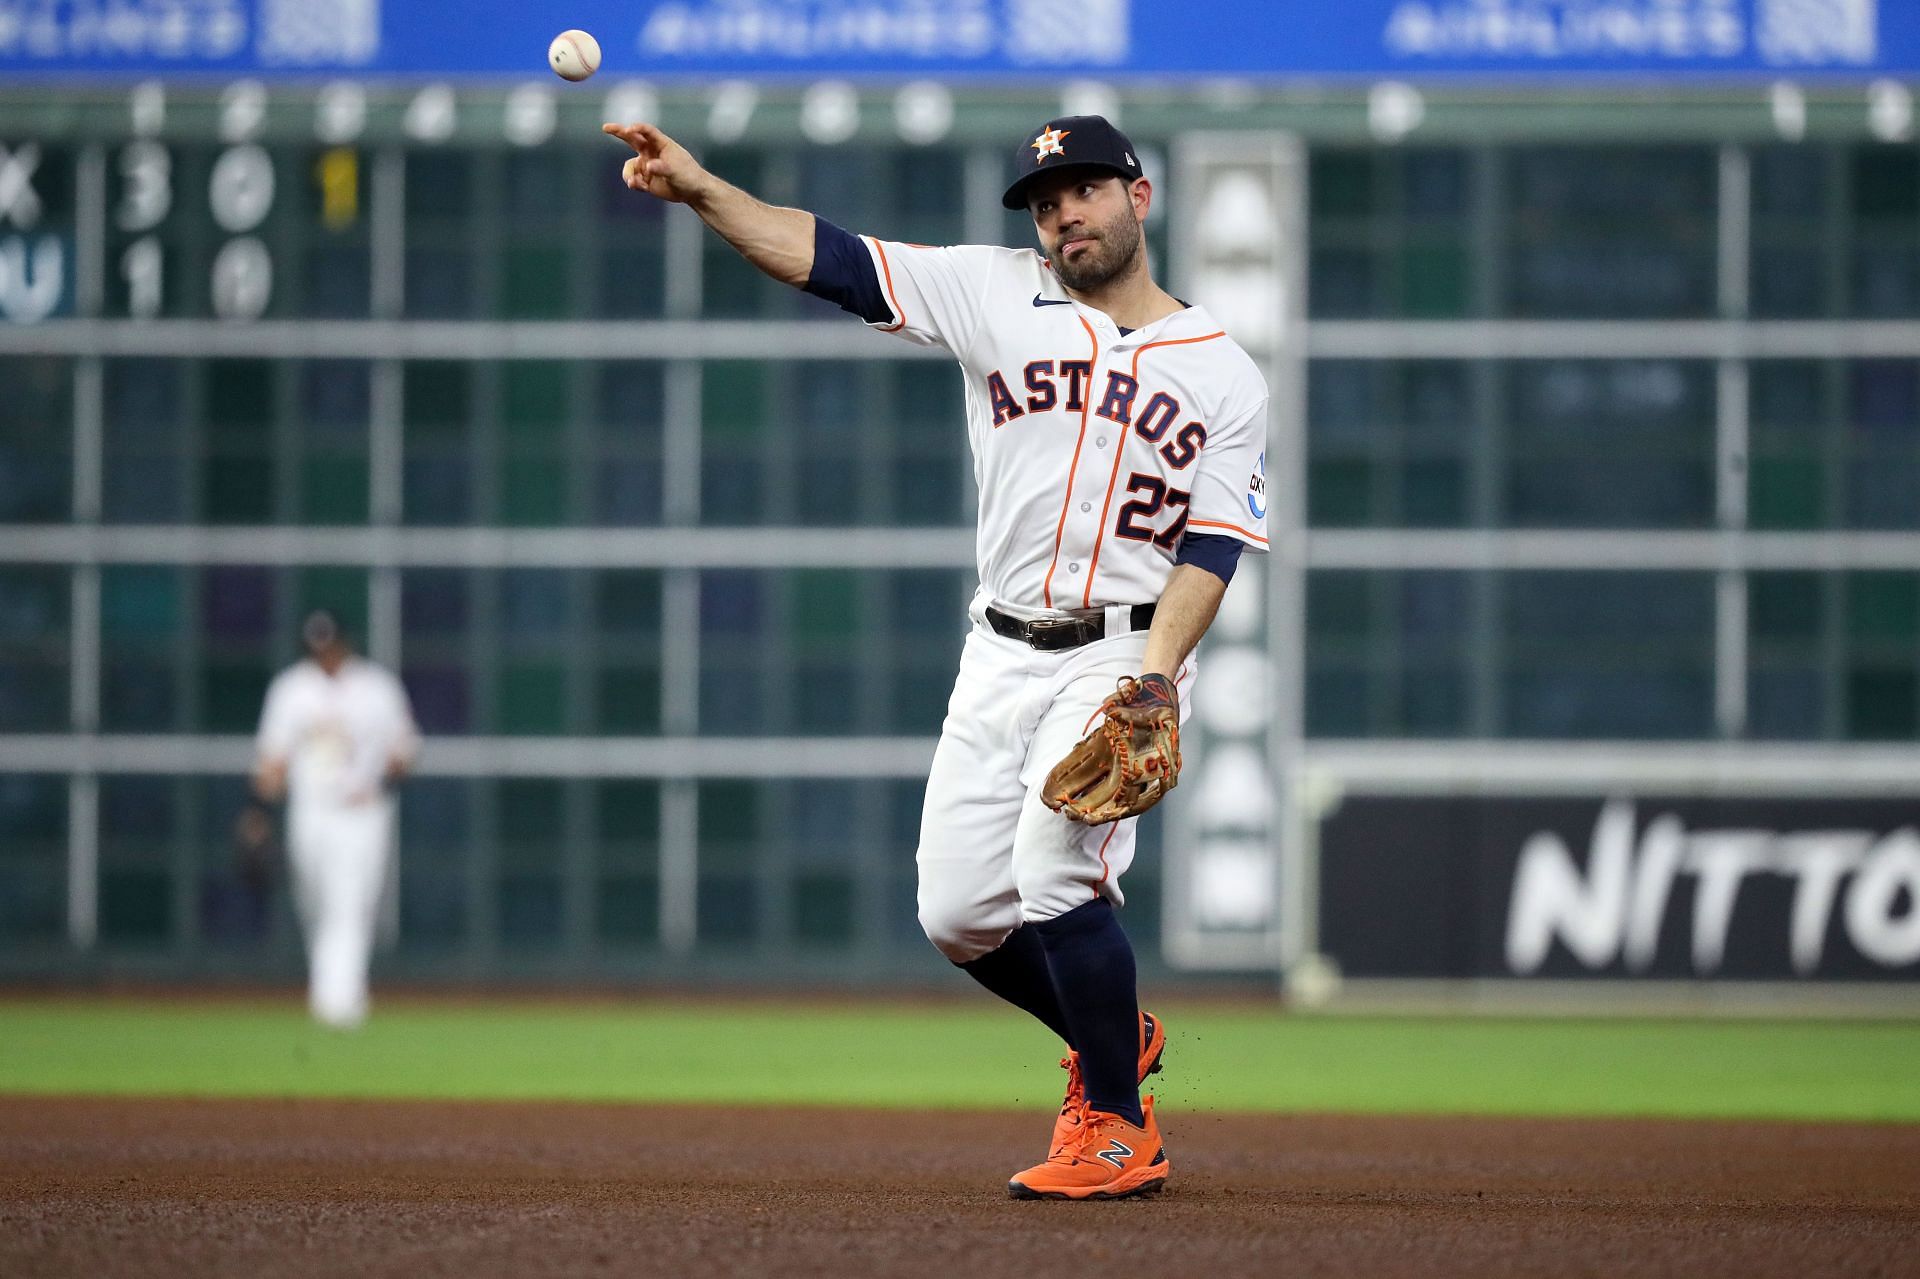 Jose Altuve recently signed a five-year $125 million contract extension which will see him retire with the Houston Astros.